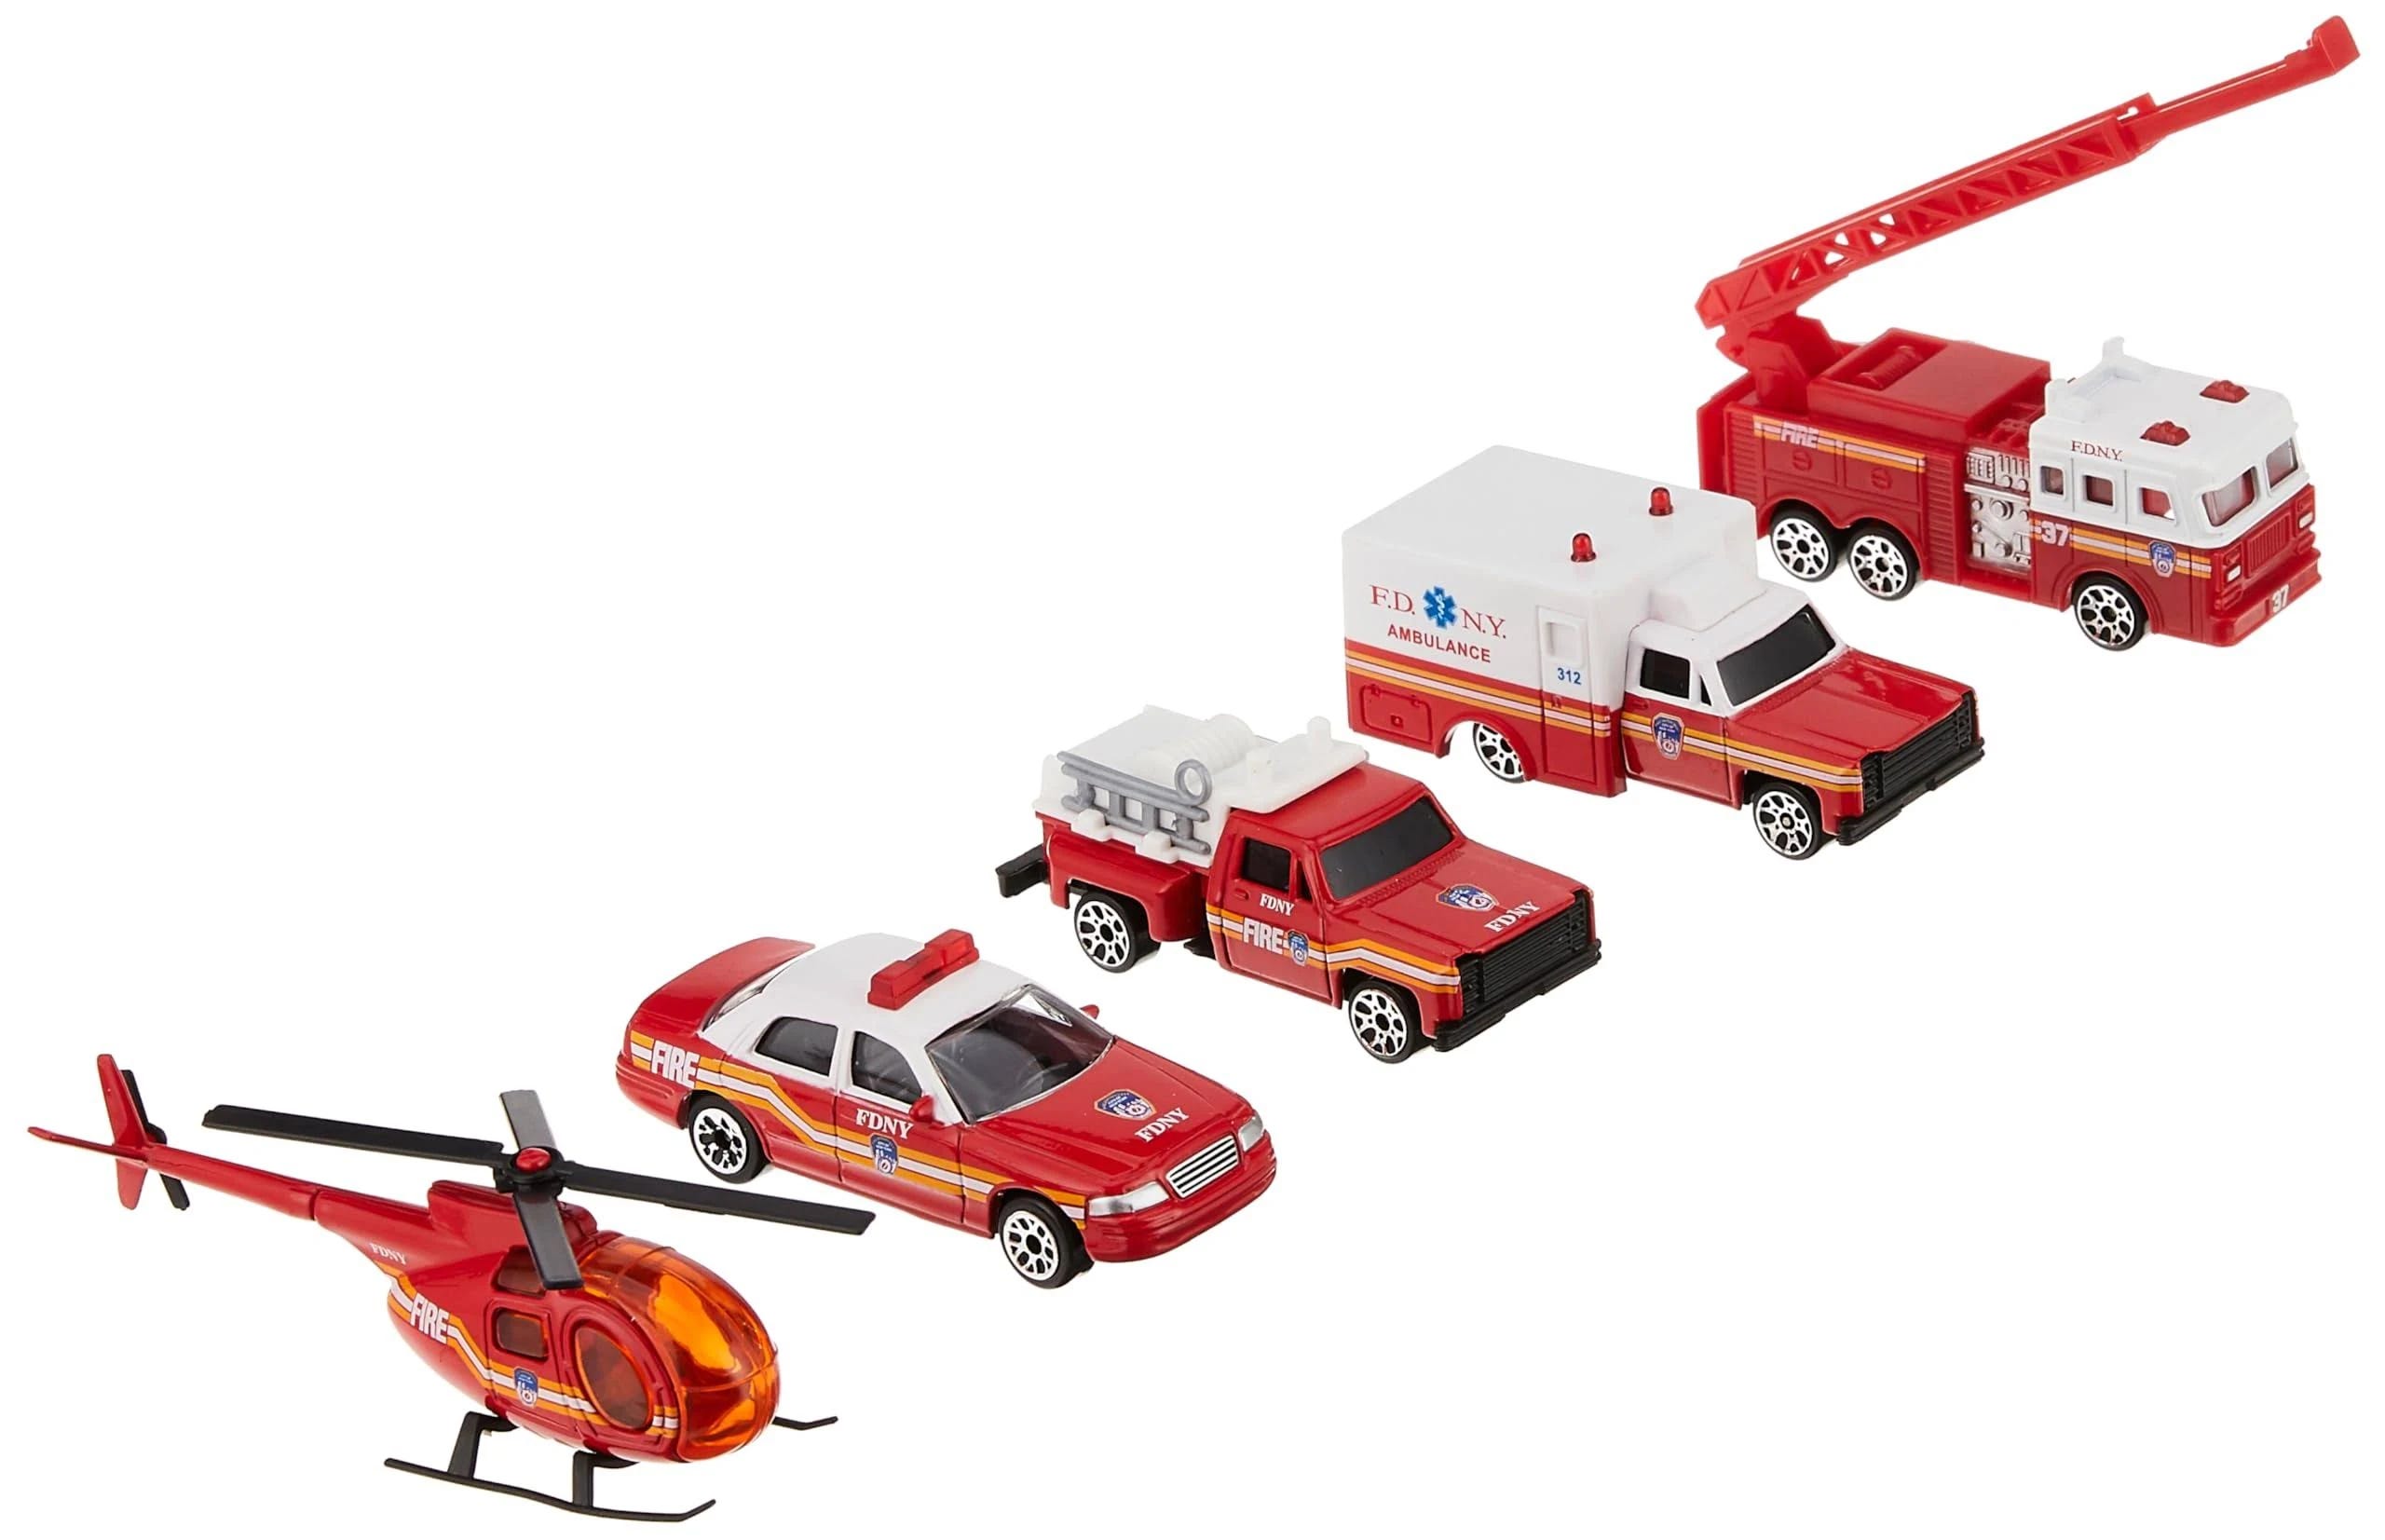 Officially Licensed Fire Department of New York Vehicle Set | Image